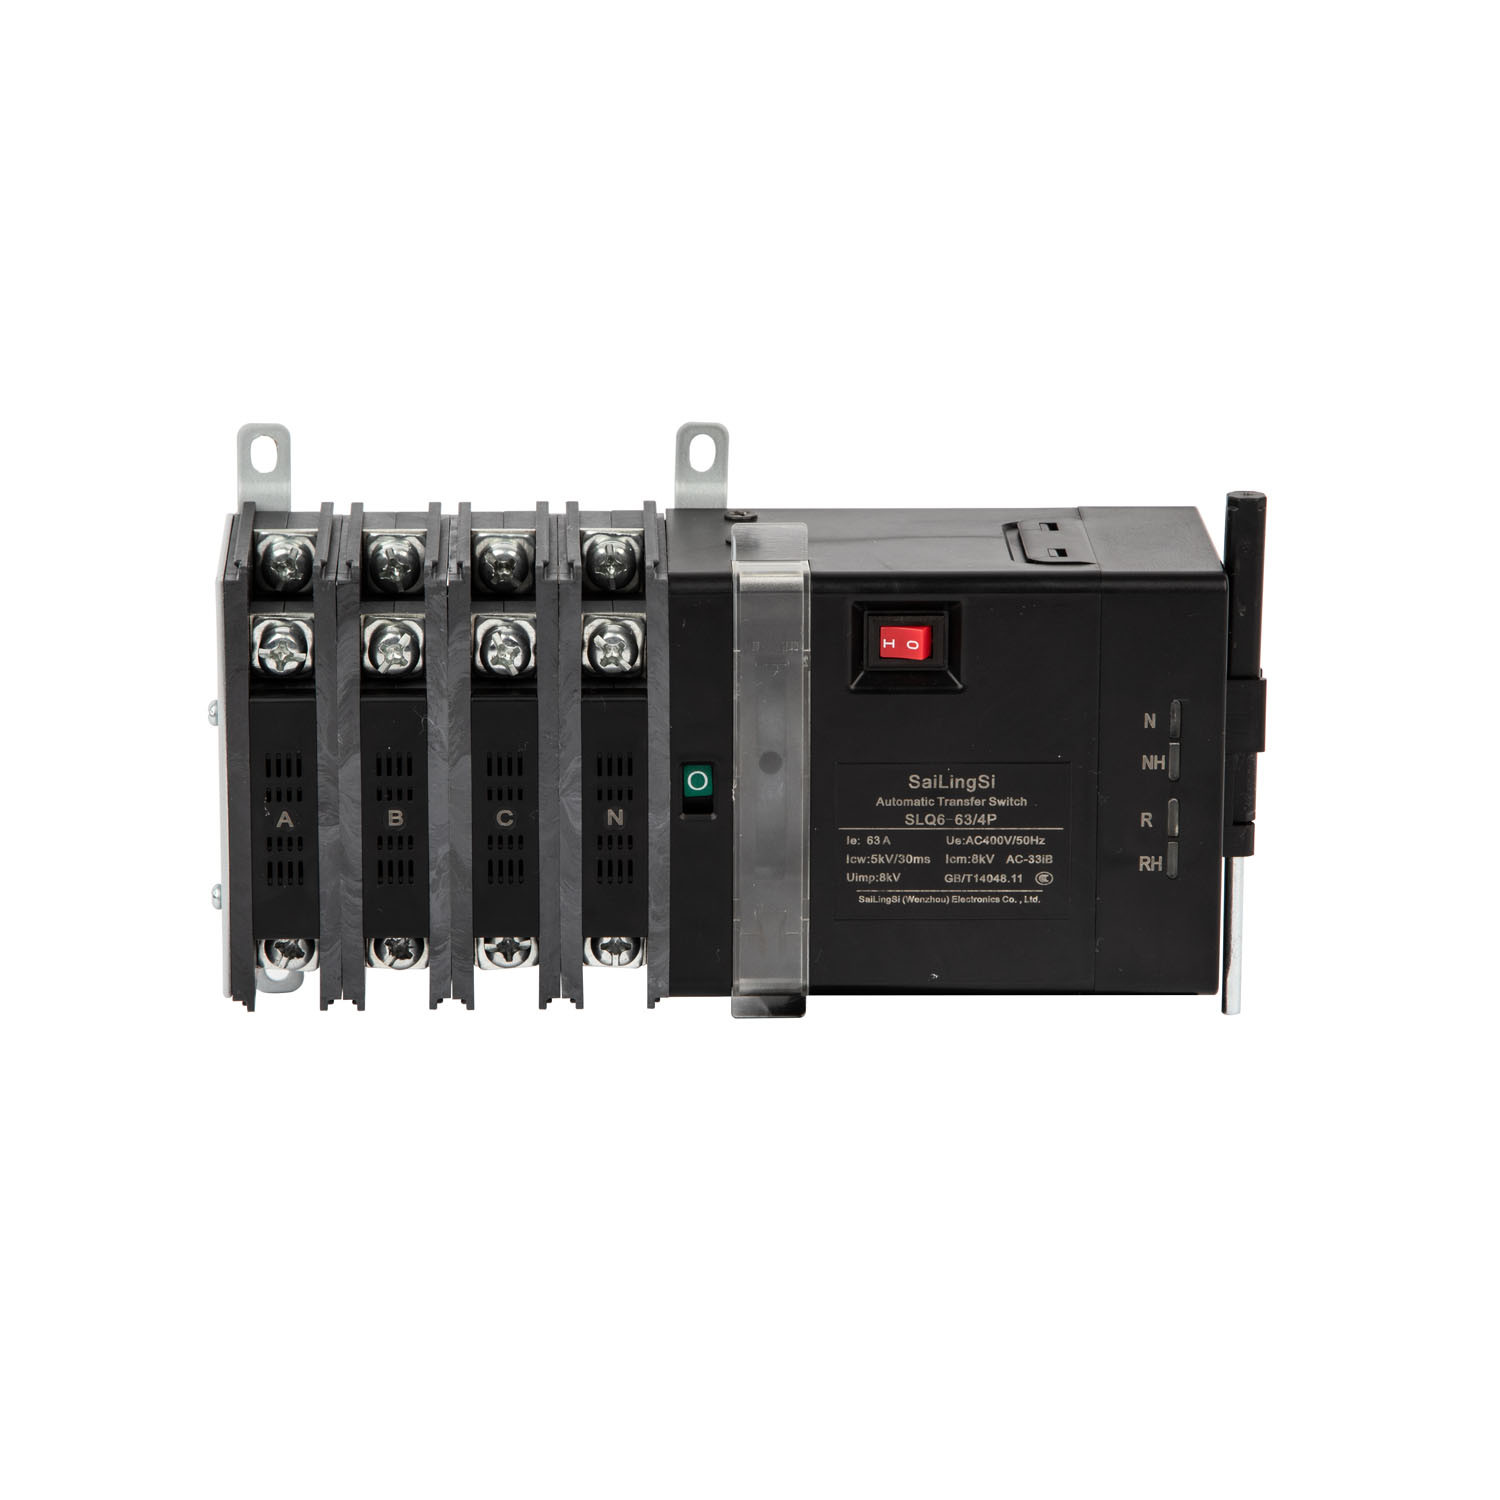 Solar Power to City Power ATS 250A 3p Automatic Transfer Switch ATS with Fire Control